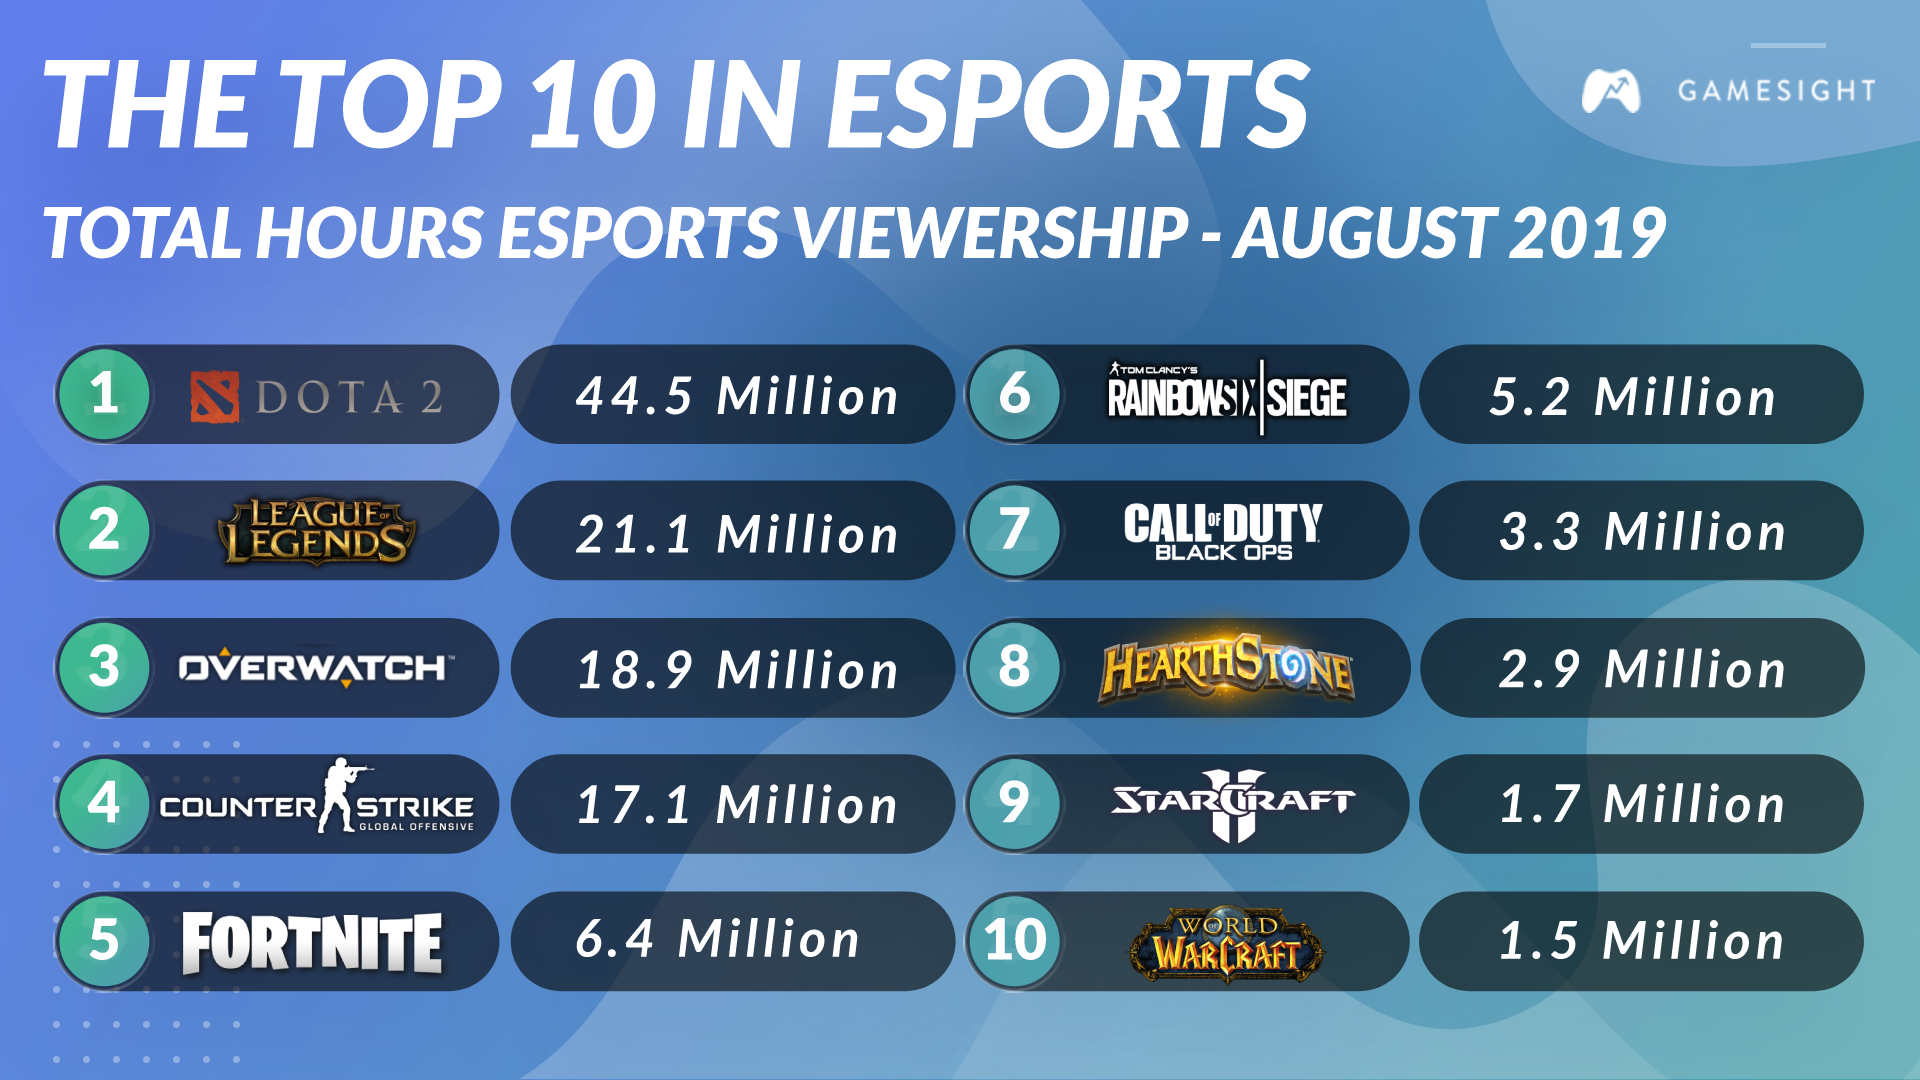 Top 10 Games in eSports